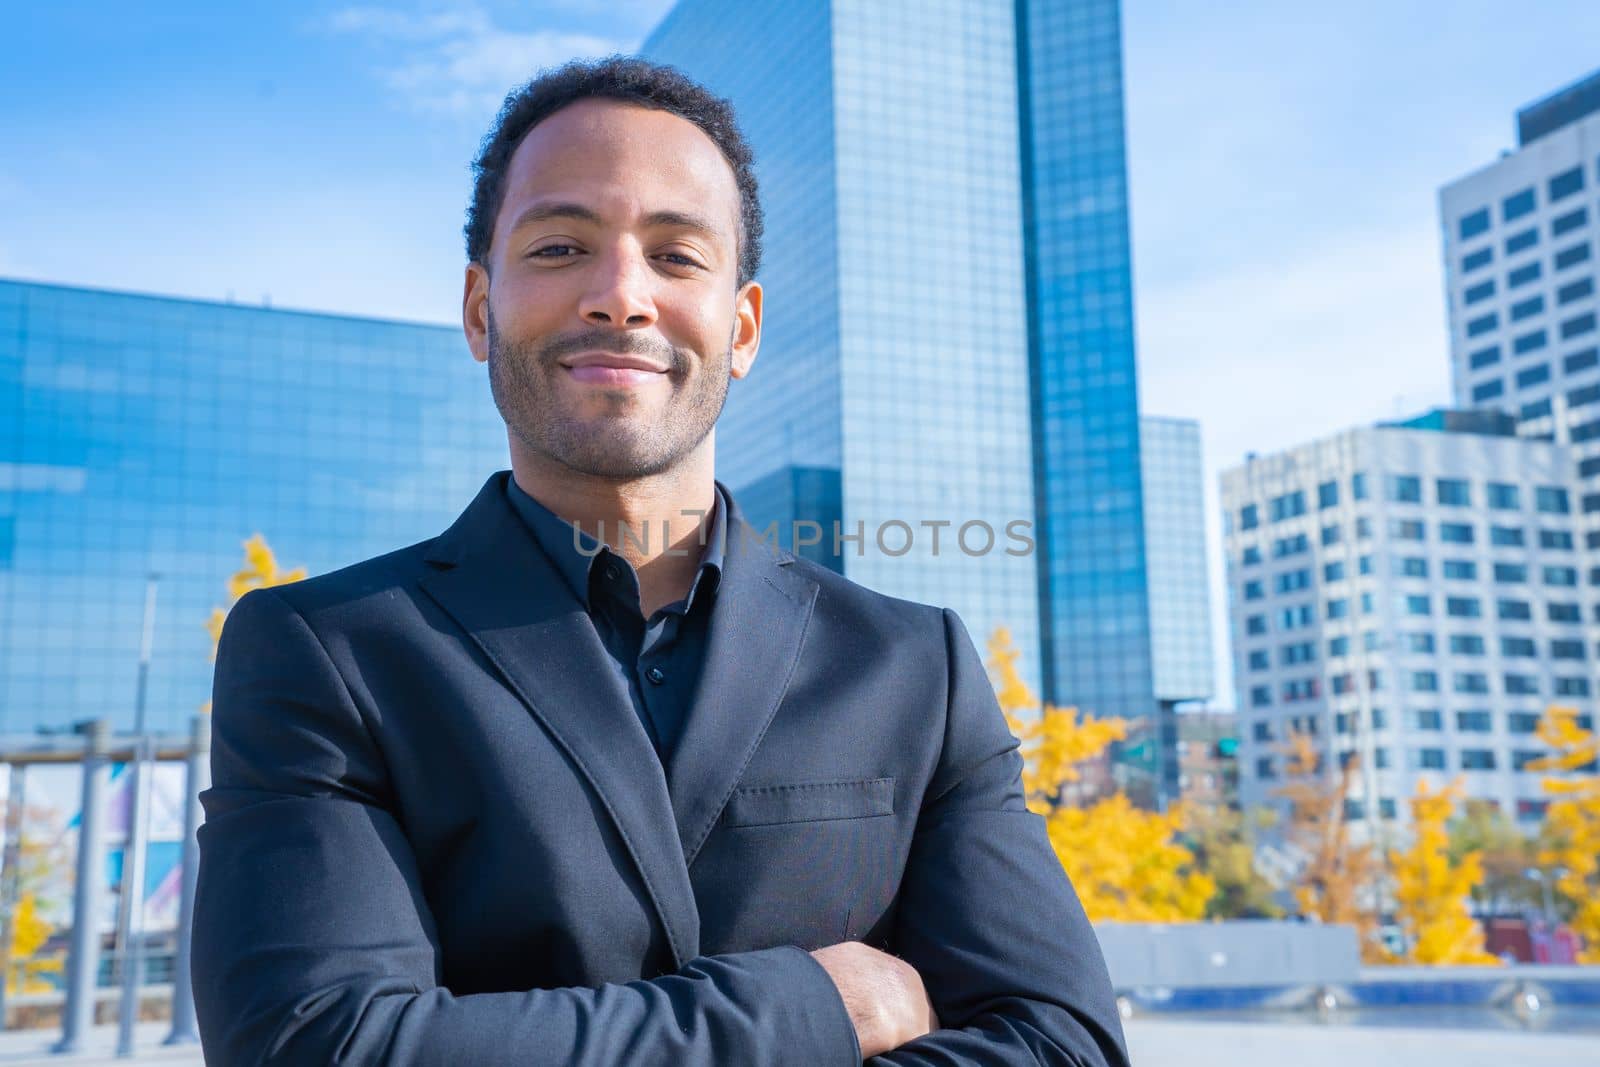 Portrait of successful smiling African American businessman in suit smiling looking at camera. by PaulCarr